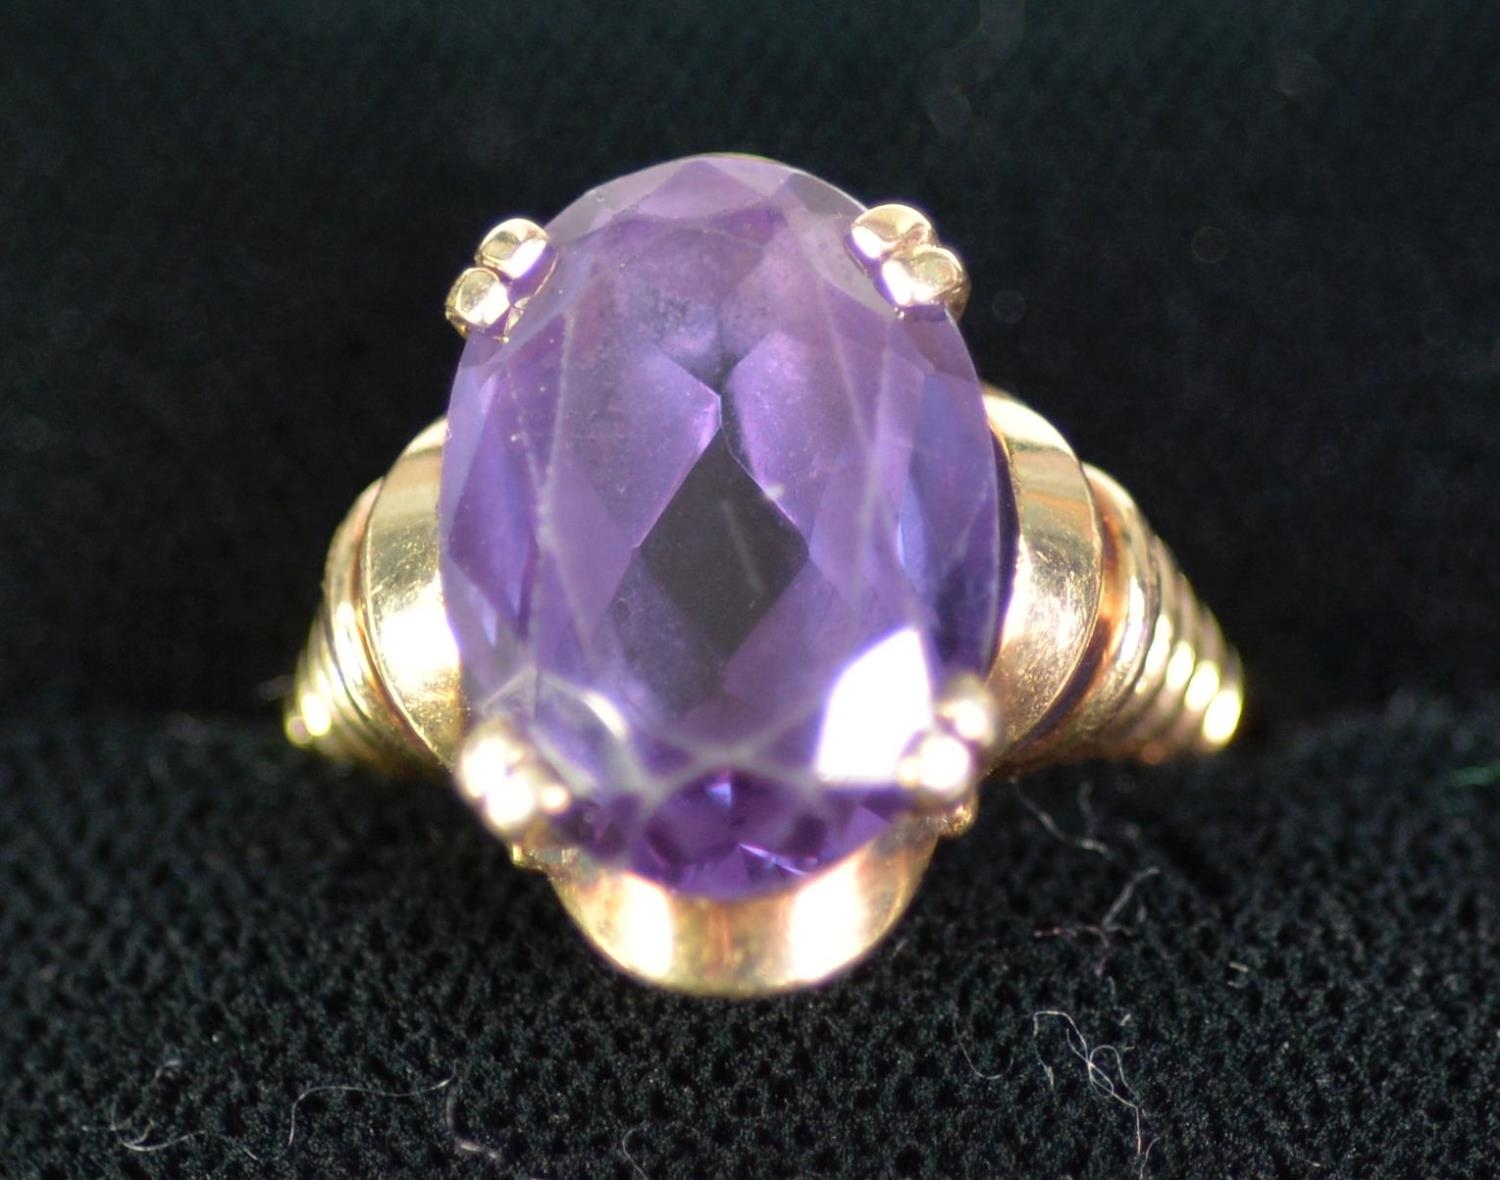 14CT GOLD DRESS RING, with a dark blye oval quartz, in a four claw setting, 8 gms, ring size L/M